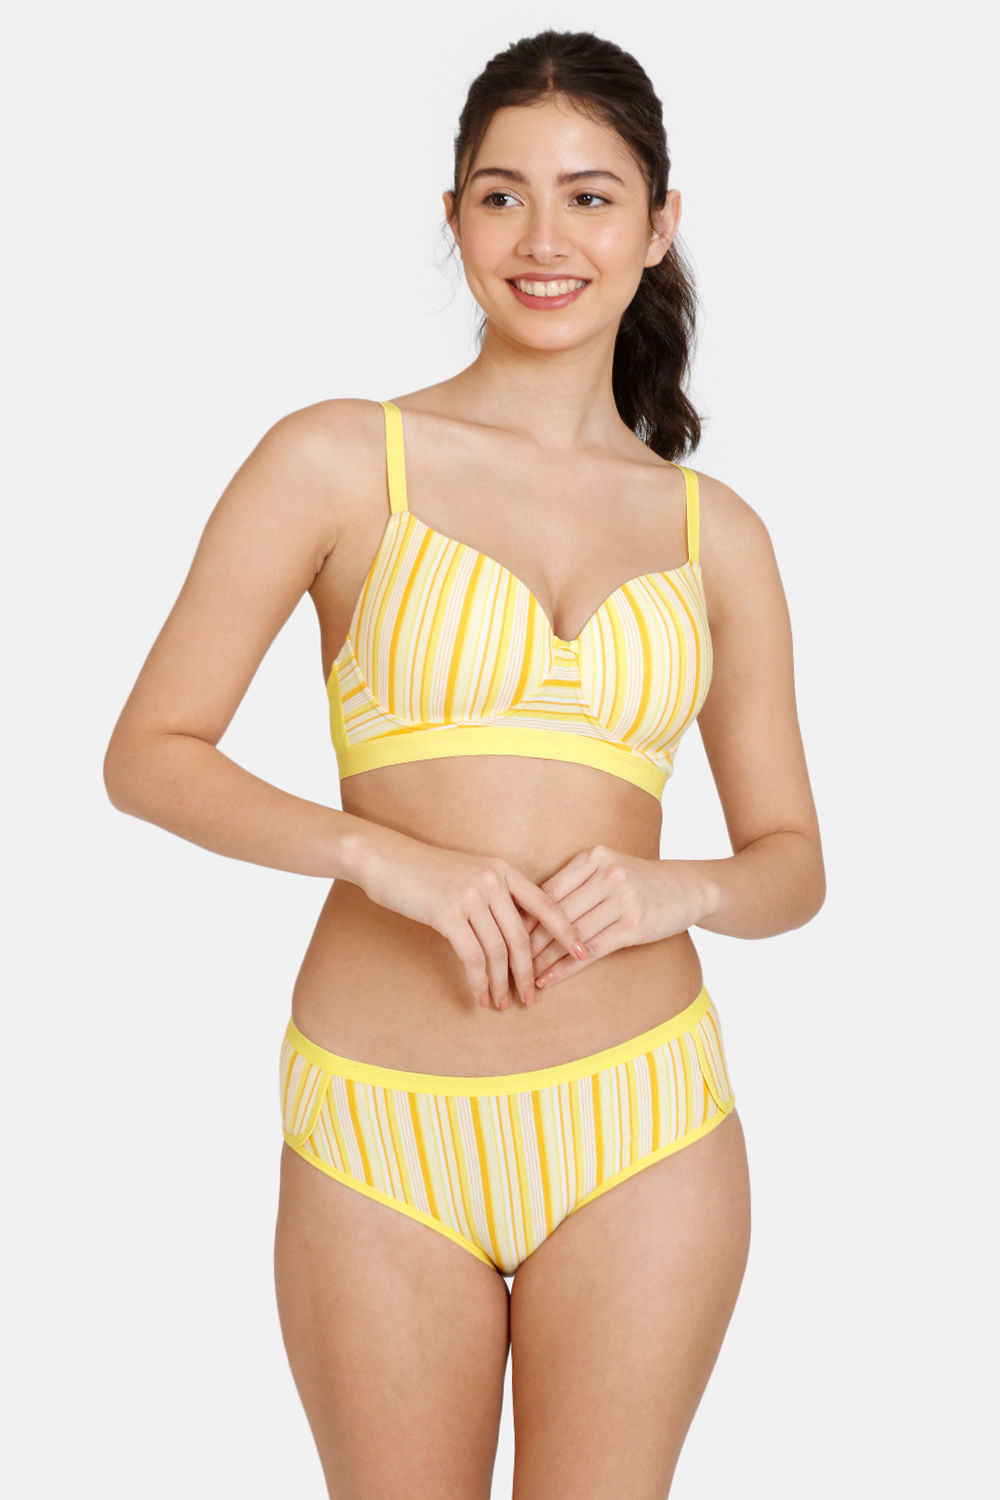 https://cdn.zivame.com/ik-seo/media/catalog/product/1/_/1_58_10/zivame-woodstock-mood-padded-non-wired-3-4th-coverage-t-shirt-bra-with-hipster-panty-maize.jpg